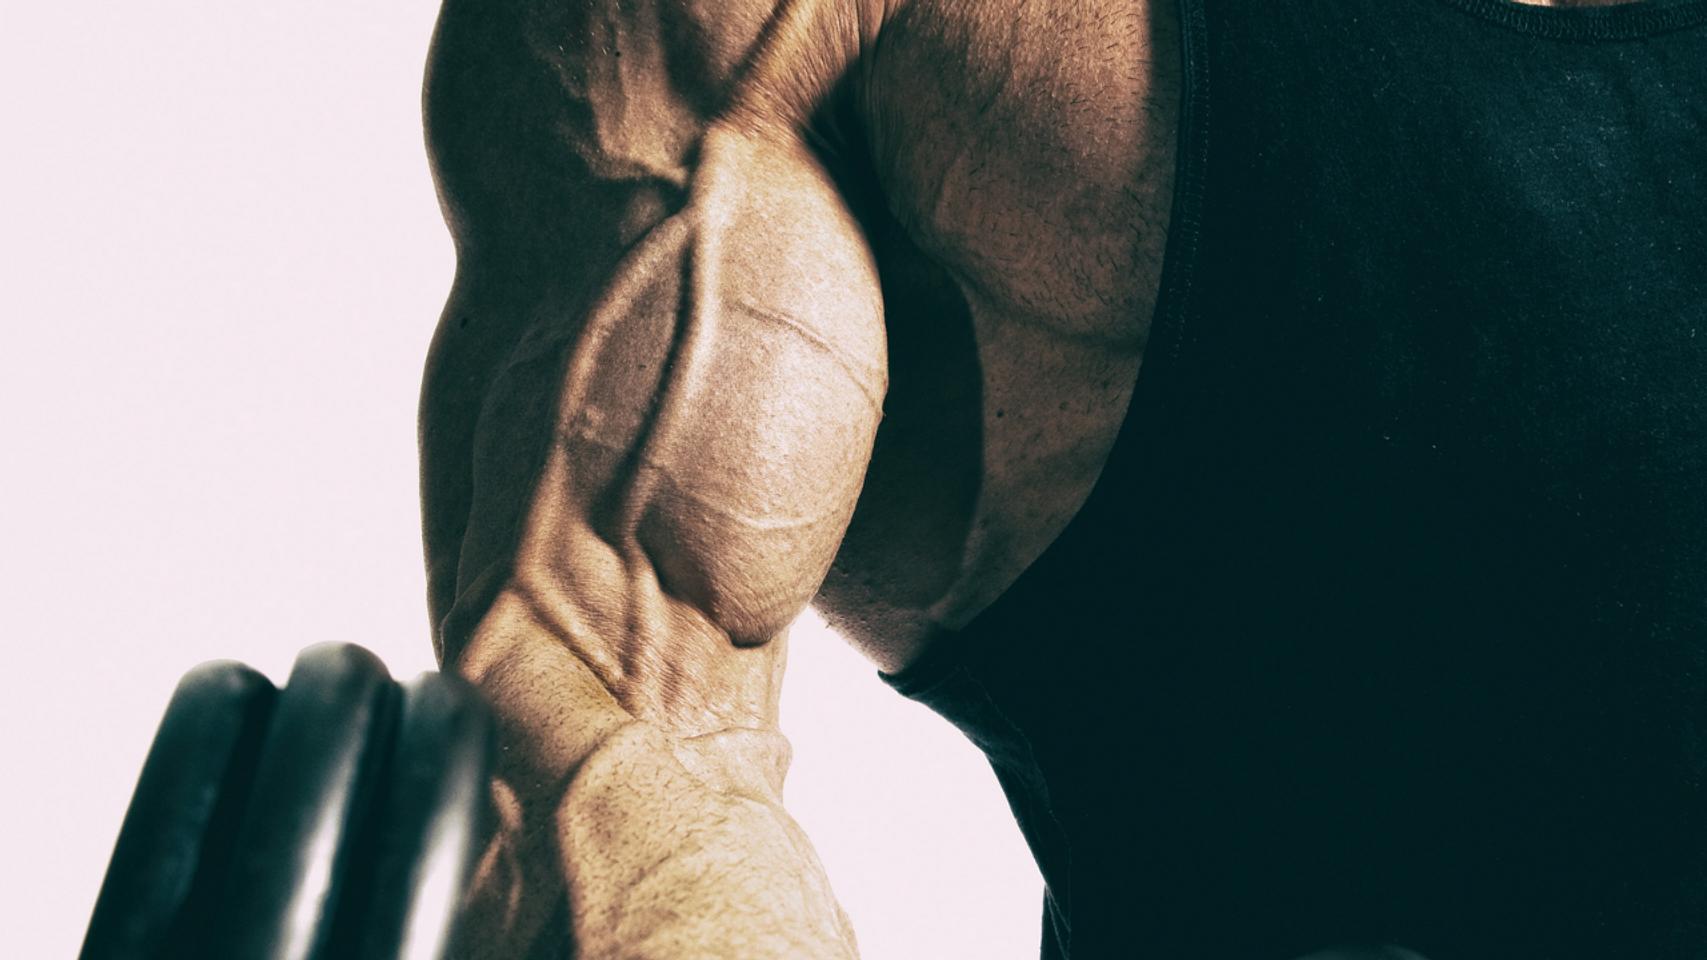 5 Easy Ways To Improve Grip Strength & Build Bigger Forearms